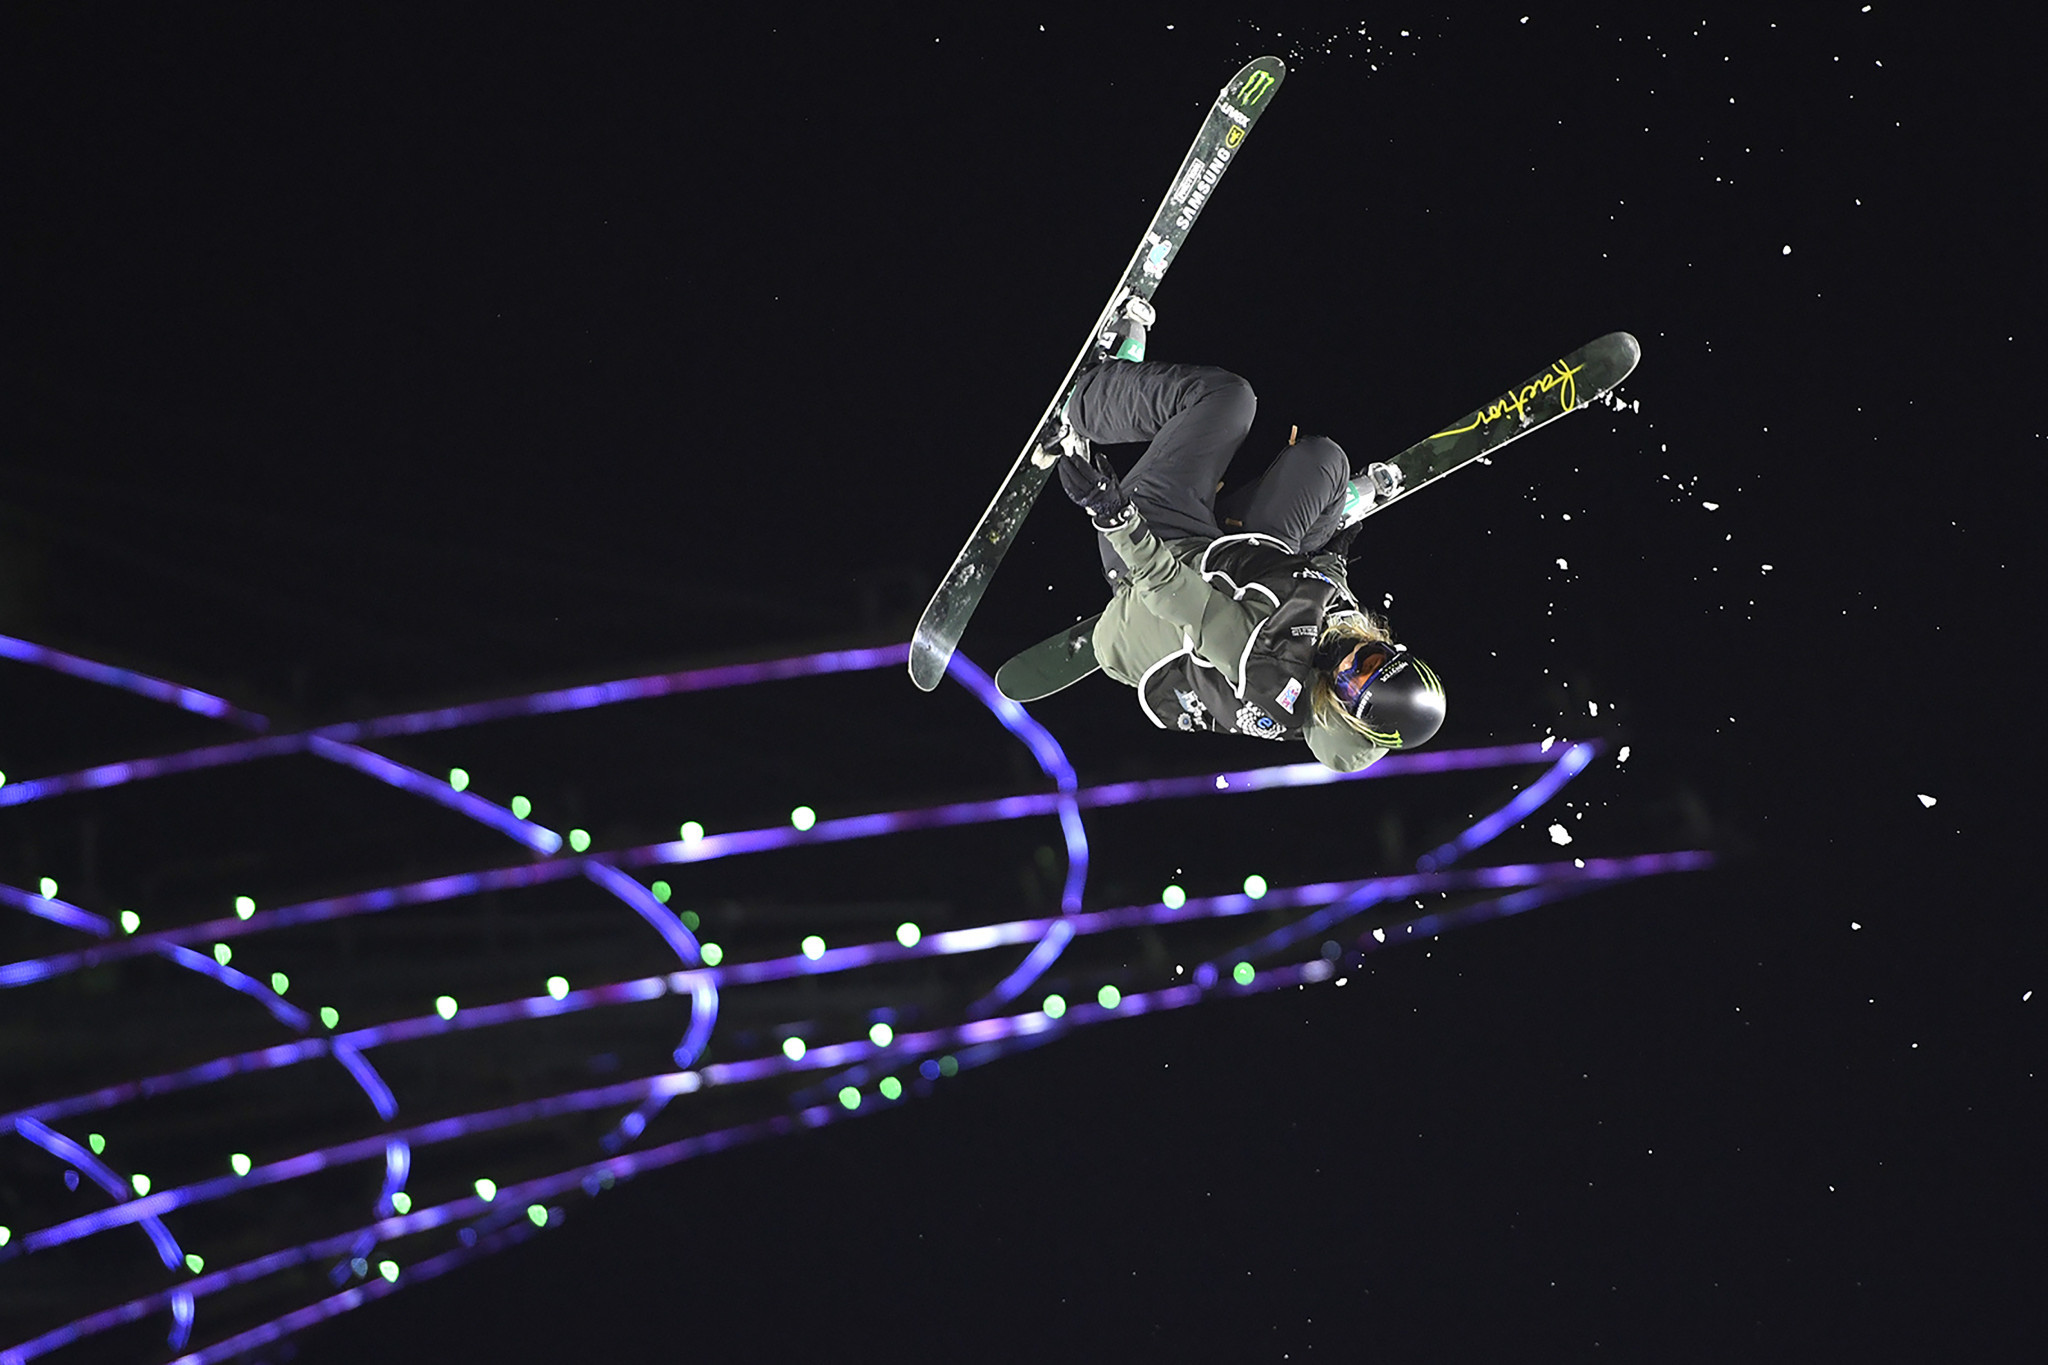 Freestyle skiing big air is among new disciplines hoping to be added to the Olympic programme at Beijing 2022 ©Getty Images